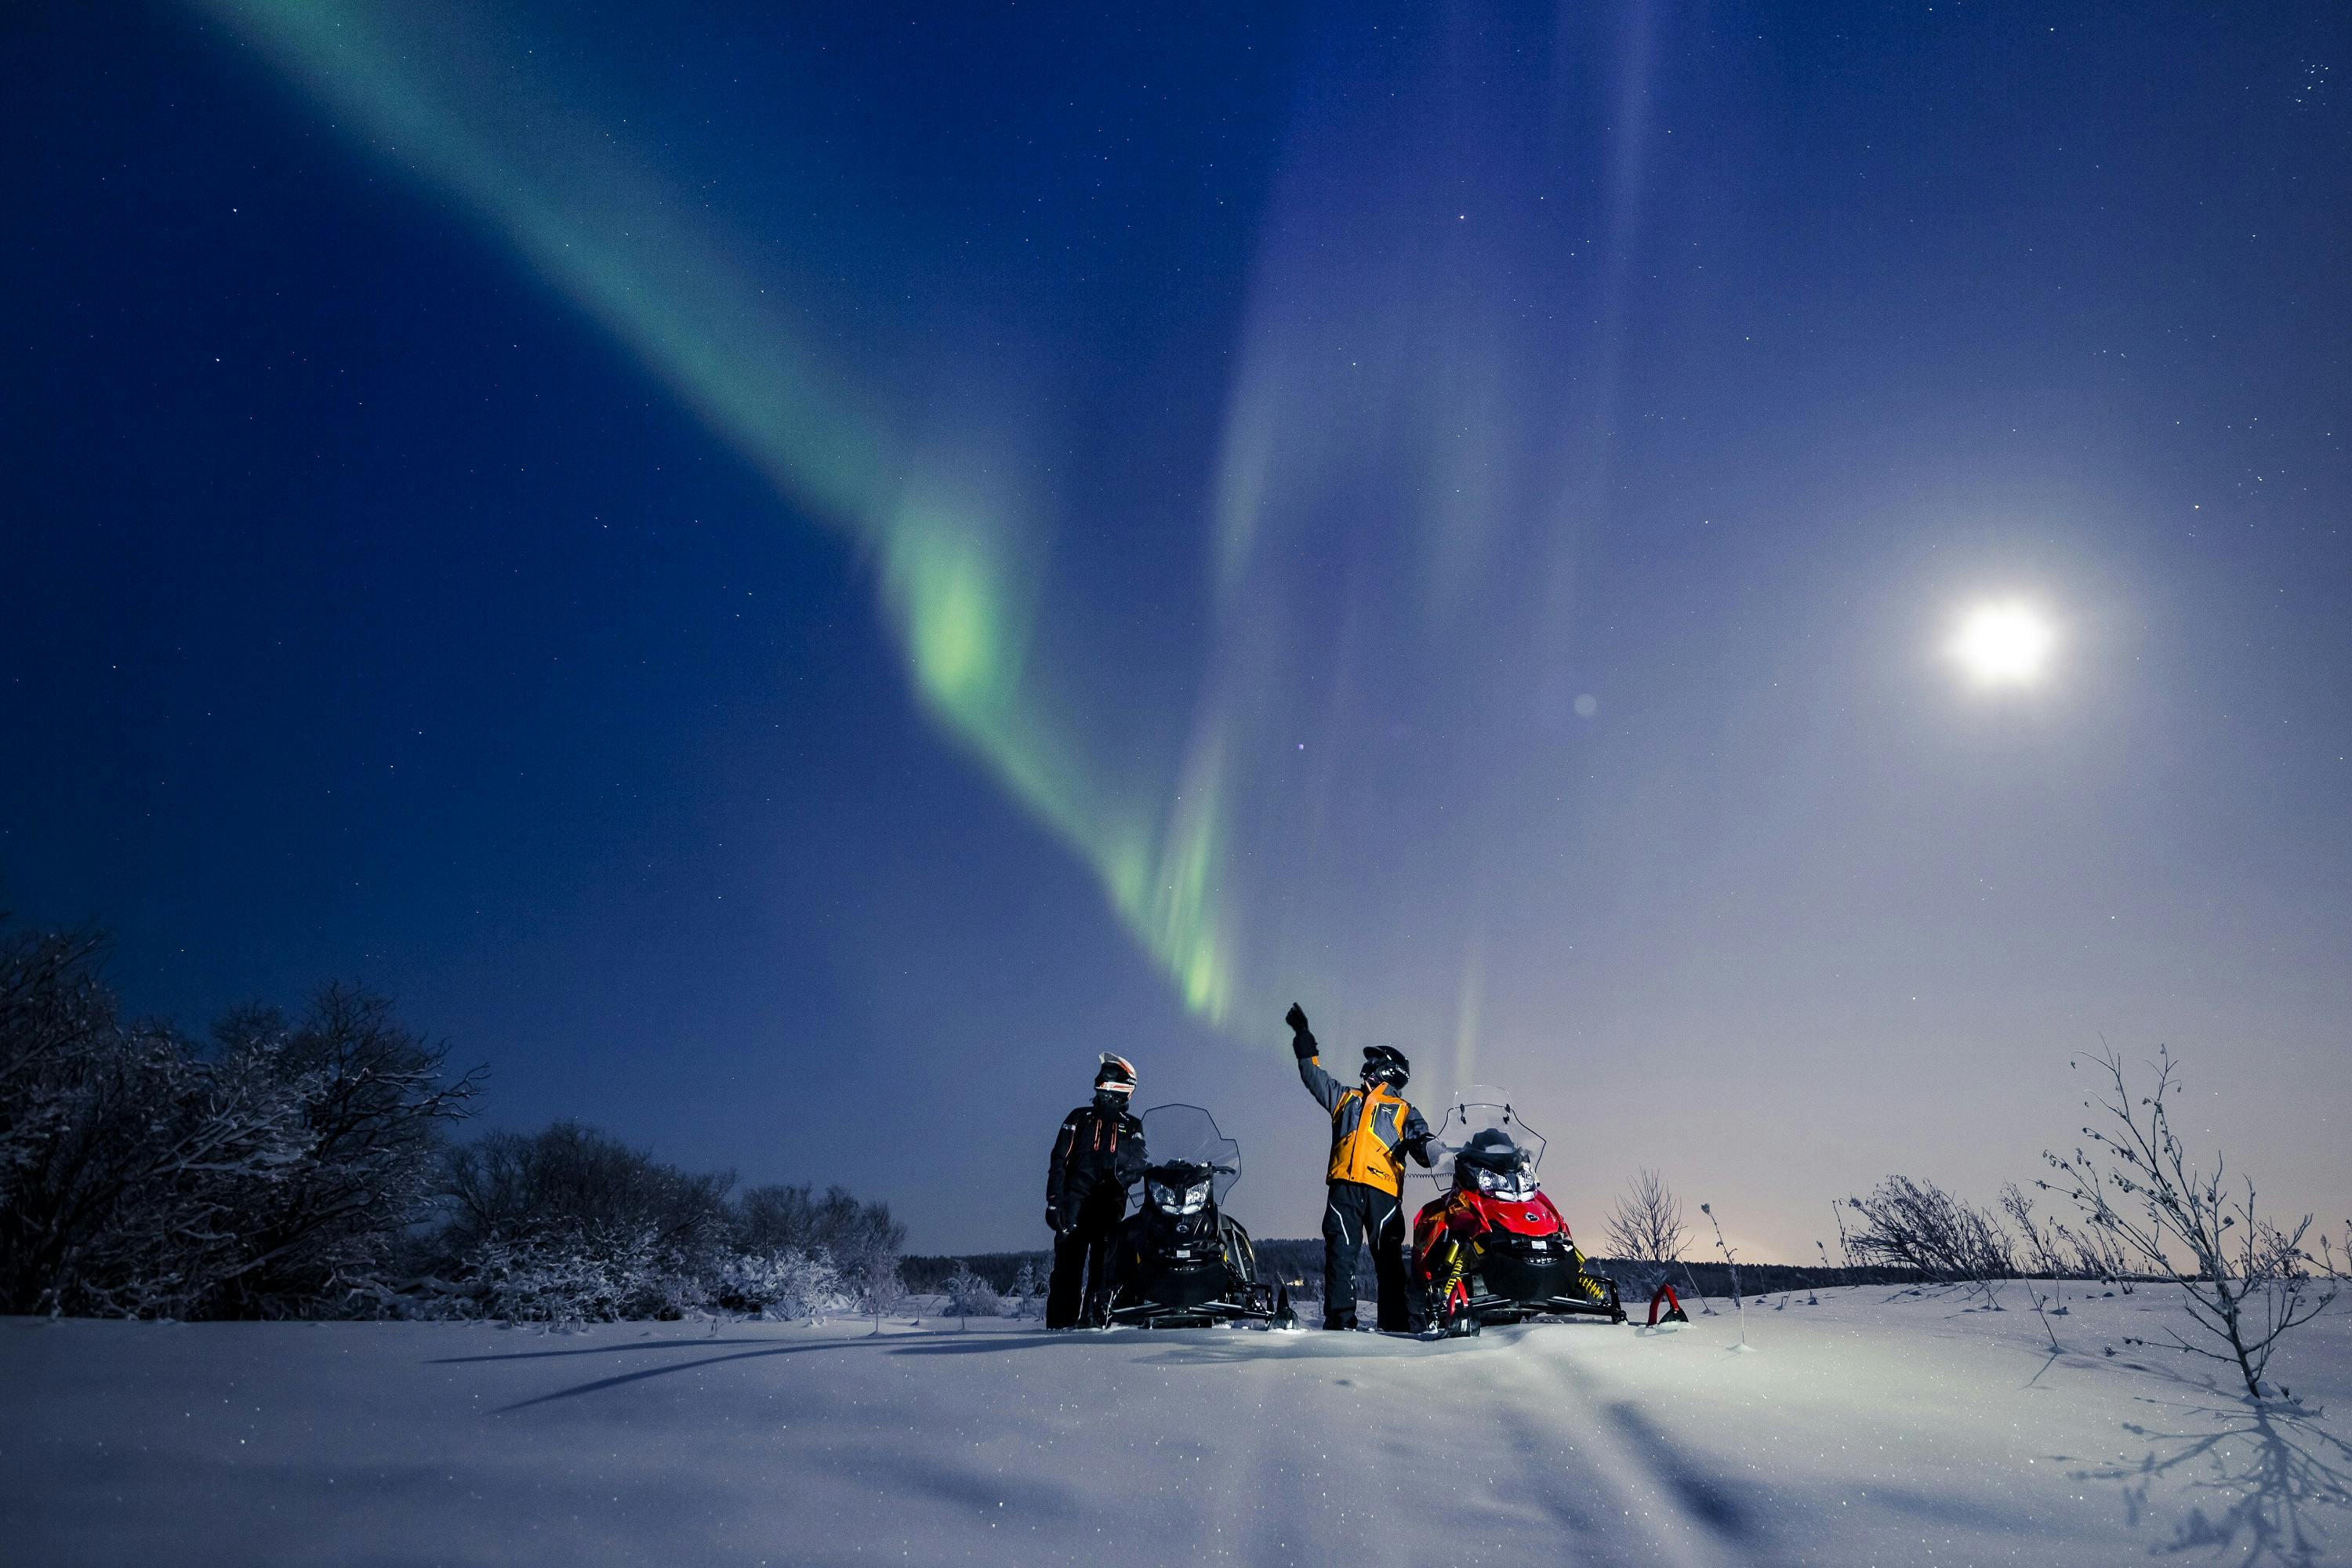 Levi northern lights tour by snowmobile with campfire BBQ